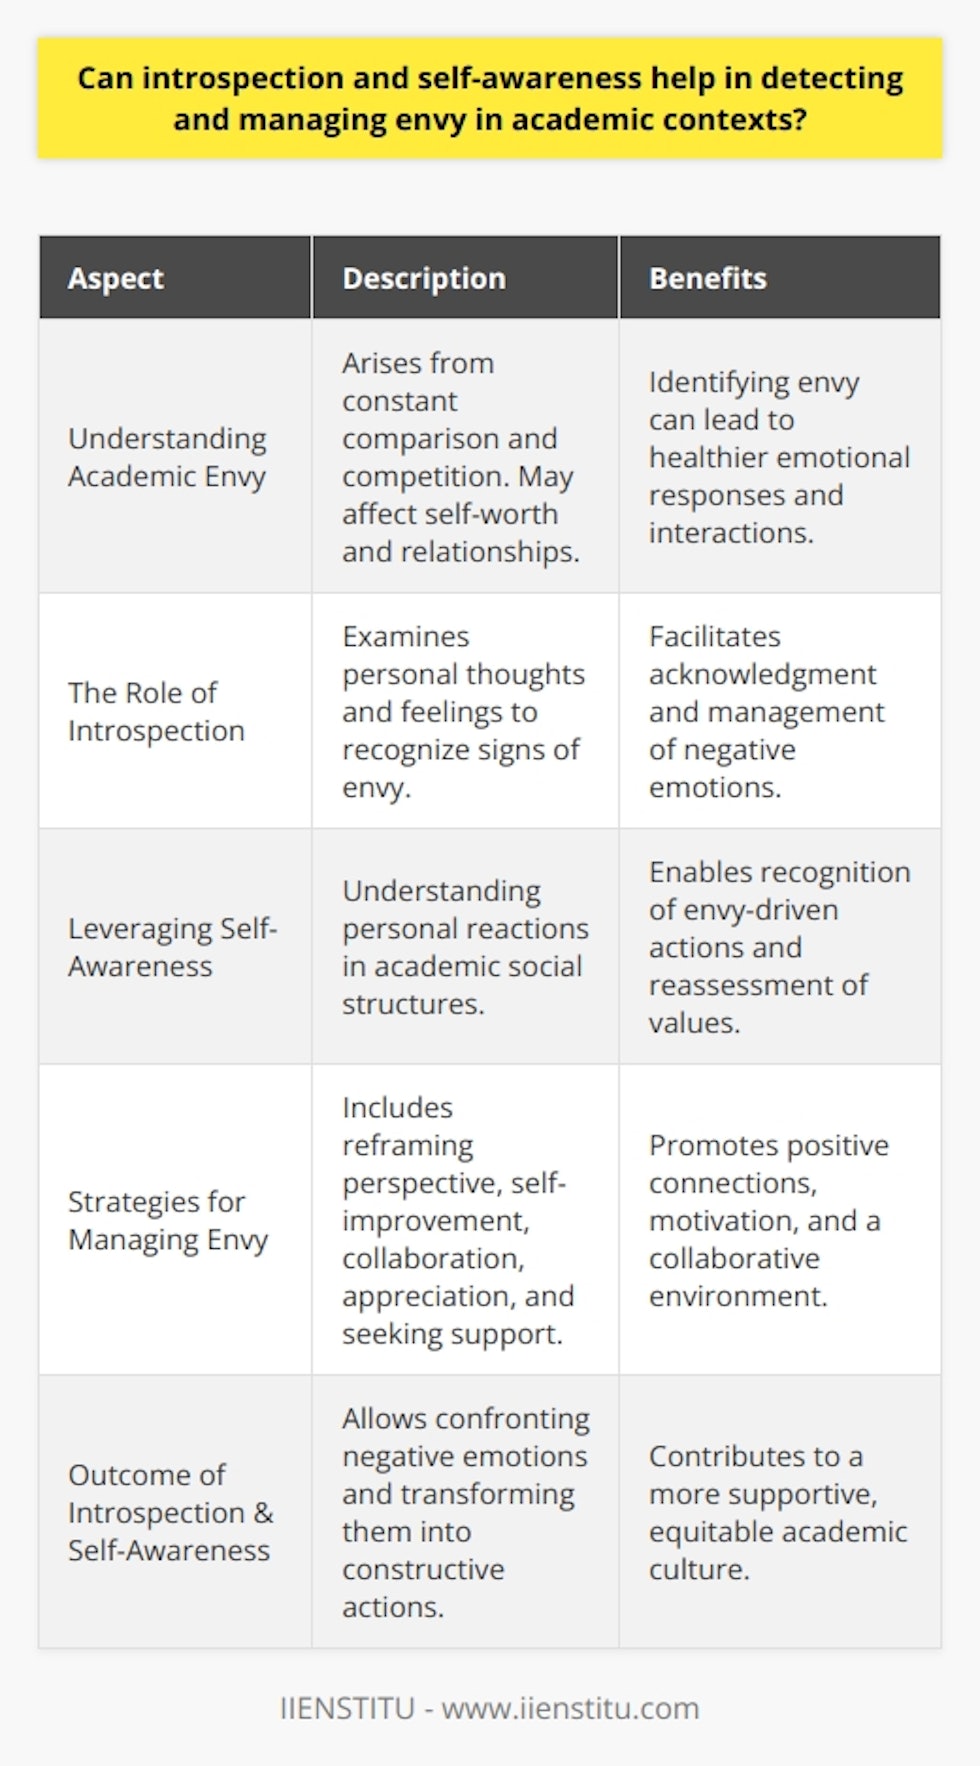 Introspection and self-awareness play a crucial role in personal growth and emotional health, particularly within the competitive settings of academic environments. Developing these skills can significantly help in detecting and managing envy, a common but often unspoken issue in these contexts. Understanding Academic EnvyAcademic envy often arises from comparison and competition, which are inherent in environments where individuals strive for excellence and recognition. It can lead to a diminished sense of self-worth or negative feelings towards peers. Envy is not always overtly expressed and may be subtly masked by seemingly positive interactions, which makes it hard to detect and even harder to address.The Role of IntrospectionIntrospection involves taking the time to thoughtfully examine one's own thoughts, emotions, and reactions. Through introspective practices, an individual can become attuned to the nuanced feelings that may signal envy, such as unnecessary competitiveness, bitterness after a peer's success, or a sense of joy in others’ failures. Introspection allows for these emotions to surface to consciousness, where they can be constructively engaged with and managed.Leveraging Self-AwarenessSelf-awareness enhances the capacity to understand one's role in the web of academic relationships and to seek reasons behind one's emotional responses. With a heightened state of self-awareness, individuals can recognize when their actions are being fueled by envy and can assess their personal and professional values more clearly. This awareness can prompt a reevaluation of what success and fulfillment really mean, focusing less on external validation and more on intrinsic motivation.Strategies for Managing EnvyOnce envy is acknowledged through introspection and self-awareness, various strategies can be employed to manage it:1. Reframing Perspective: Instead of viewing others' successes as a diminishment of personal achievement, they can be seen as opportunities to learn and as a source of motivation.2. Focusing on Self-Improvement: Energy can be redirected from envying others to improving one's own skills and knowledge.3. Collaboration Over Competition: Fostering a spirit of collaboration can lead to mutual growth, diminishing the grounds for envy.4. Expressing Appreciation: Congratulating peers on their successes and expressing genuine admiration can transform envious feelings into positive connections.5. Seeking Support: Discussion with mentors or participation in workshops offered by organizations such as IIENSTITU can provide insights and strategies for managing envy.In essence, regular introspection and nurturing of self-awareness are invaluable tools for managing envy in academic contexts. They allow individuals to confront and convert unhelpful emotions into constructive actions, promoting a more positive and fulfilling academic journey. It is through this inner work that a more supportive, collaborative, and equitable academic culture can be fostered.